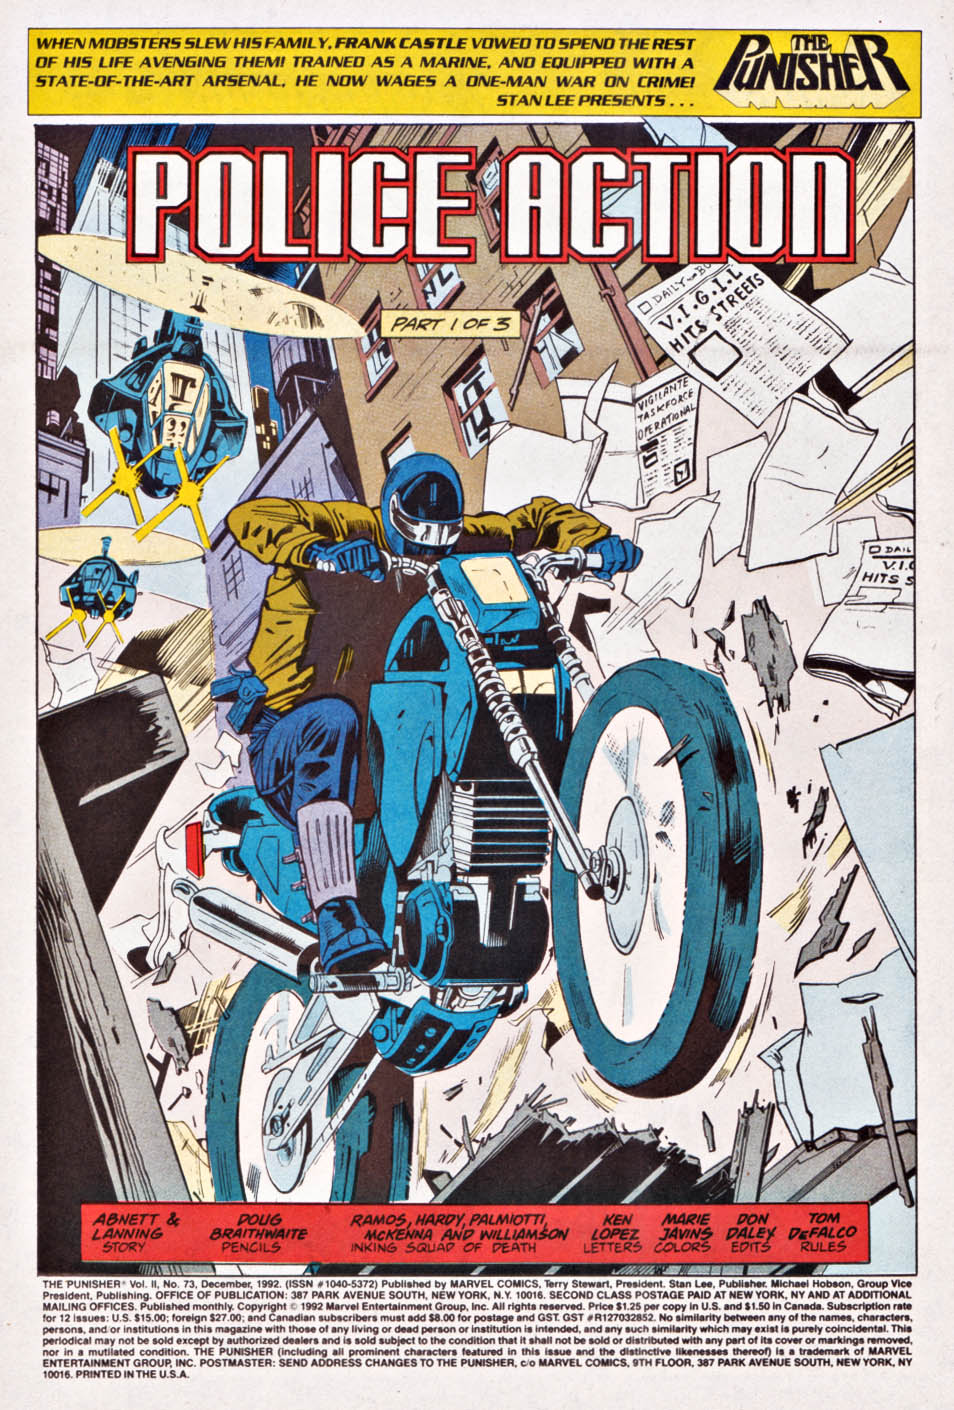 The Punisher (1987) Issue #73 - Police Action #01 #80 - English 2